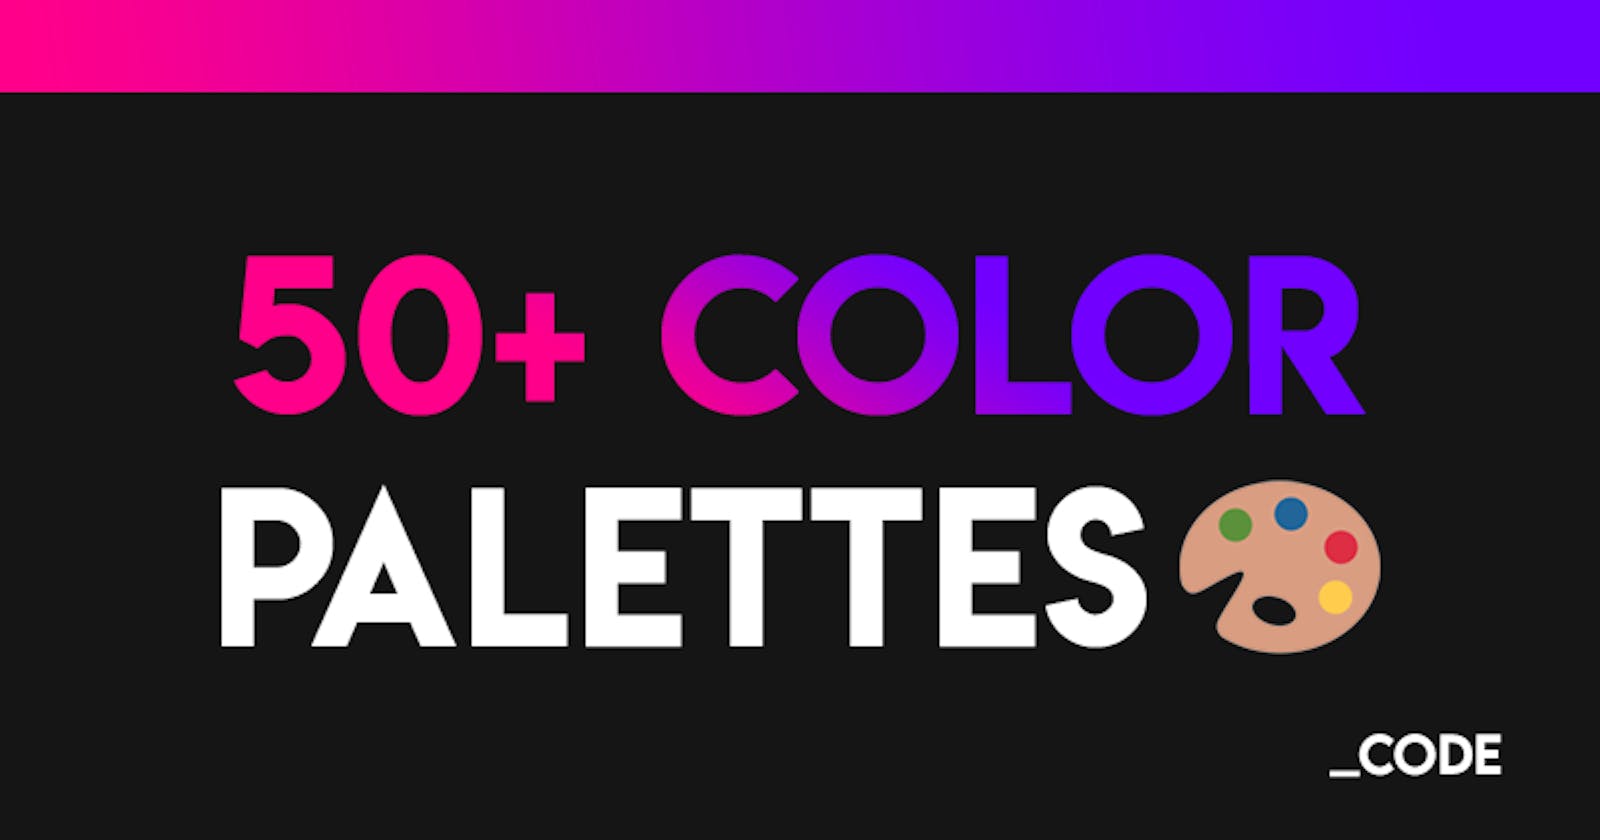 I made 50+ COLOR PALETTES for you to use in your next projects and designs 🎨